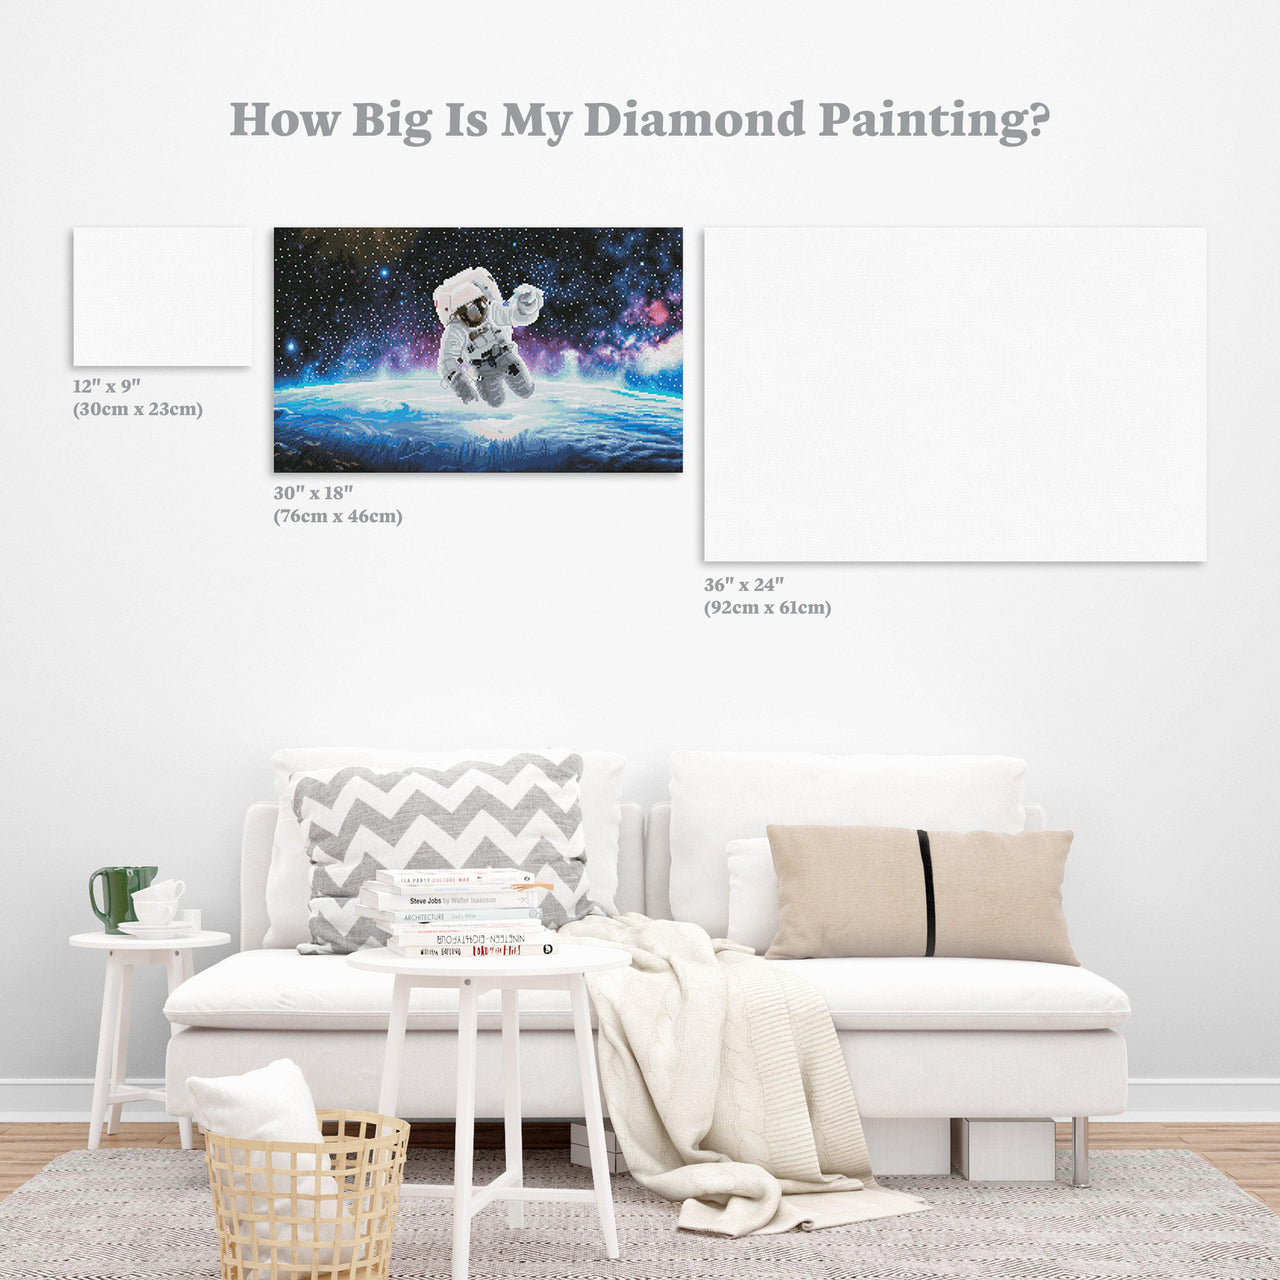 Diamond Painting Astronaut Over Earth 18" x 30″ (46cm x 76cm) / Round With 40 Colors Including 2 ABs